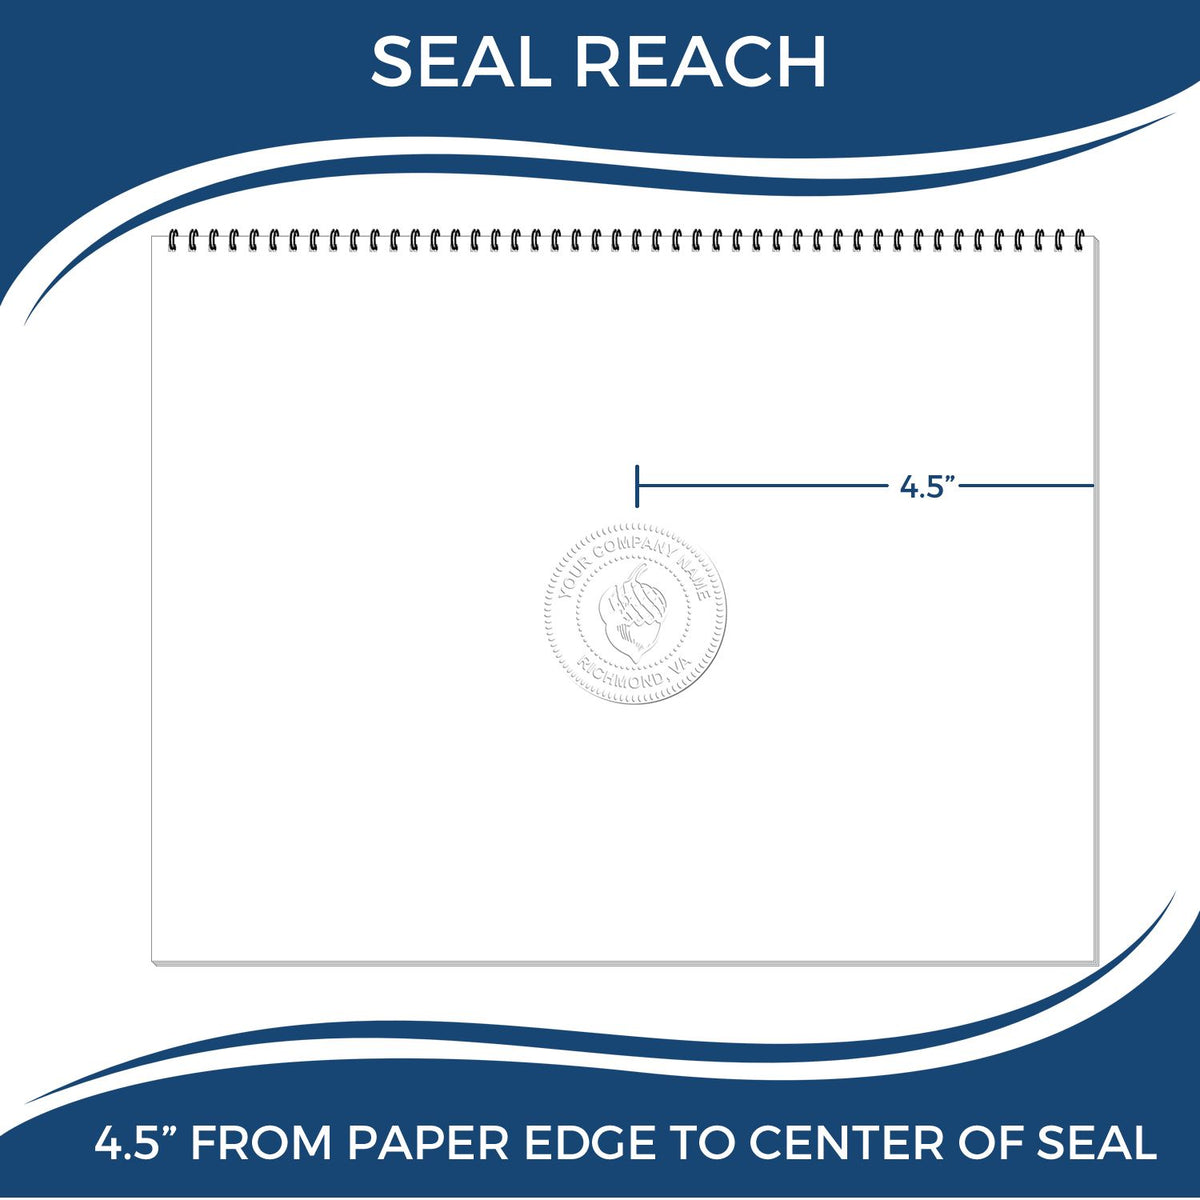 An infographic showing the seal reach which is represented by a ruler and a miniature seal image of the State of New Jersey Extended Long Reach Geologist Seal